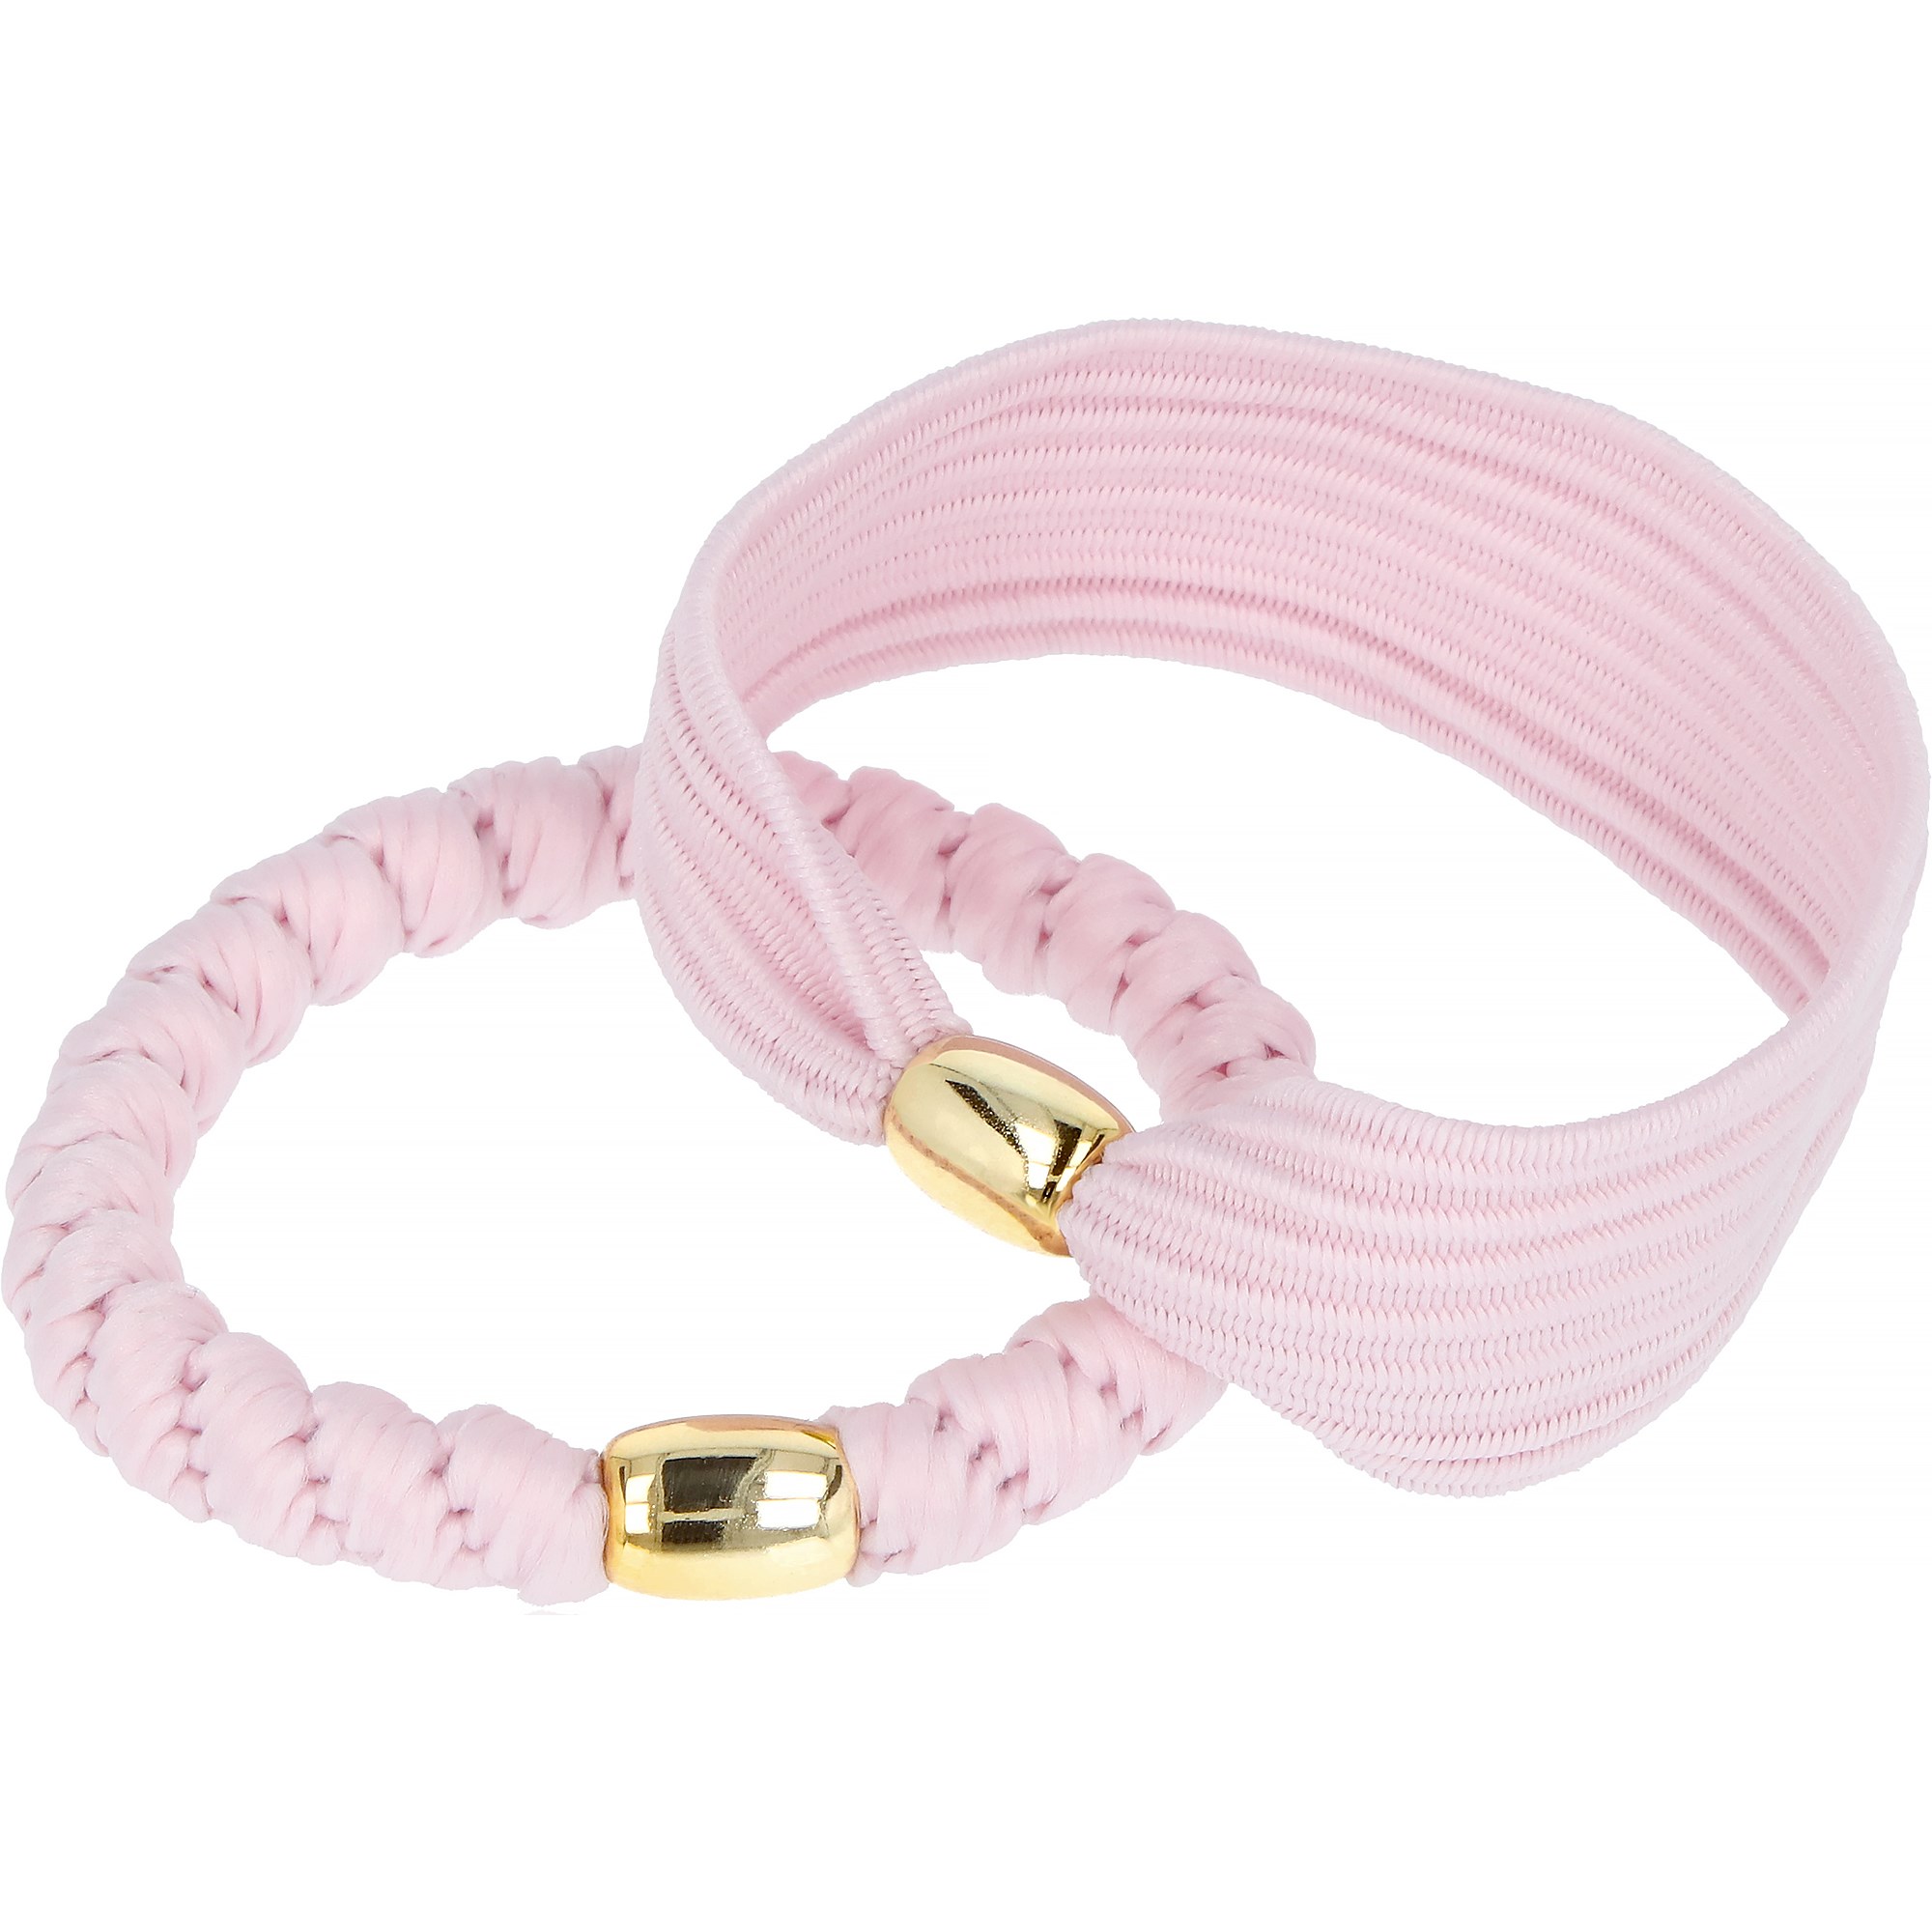 By Lyko Hair Ties Twisted & Fla Pink